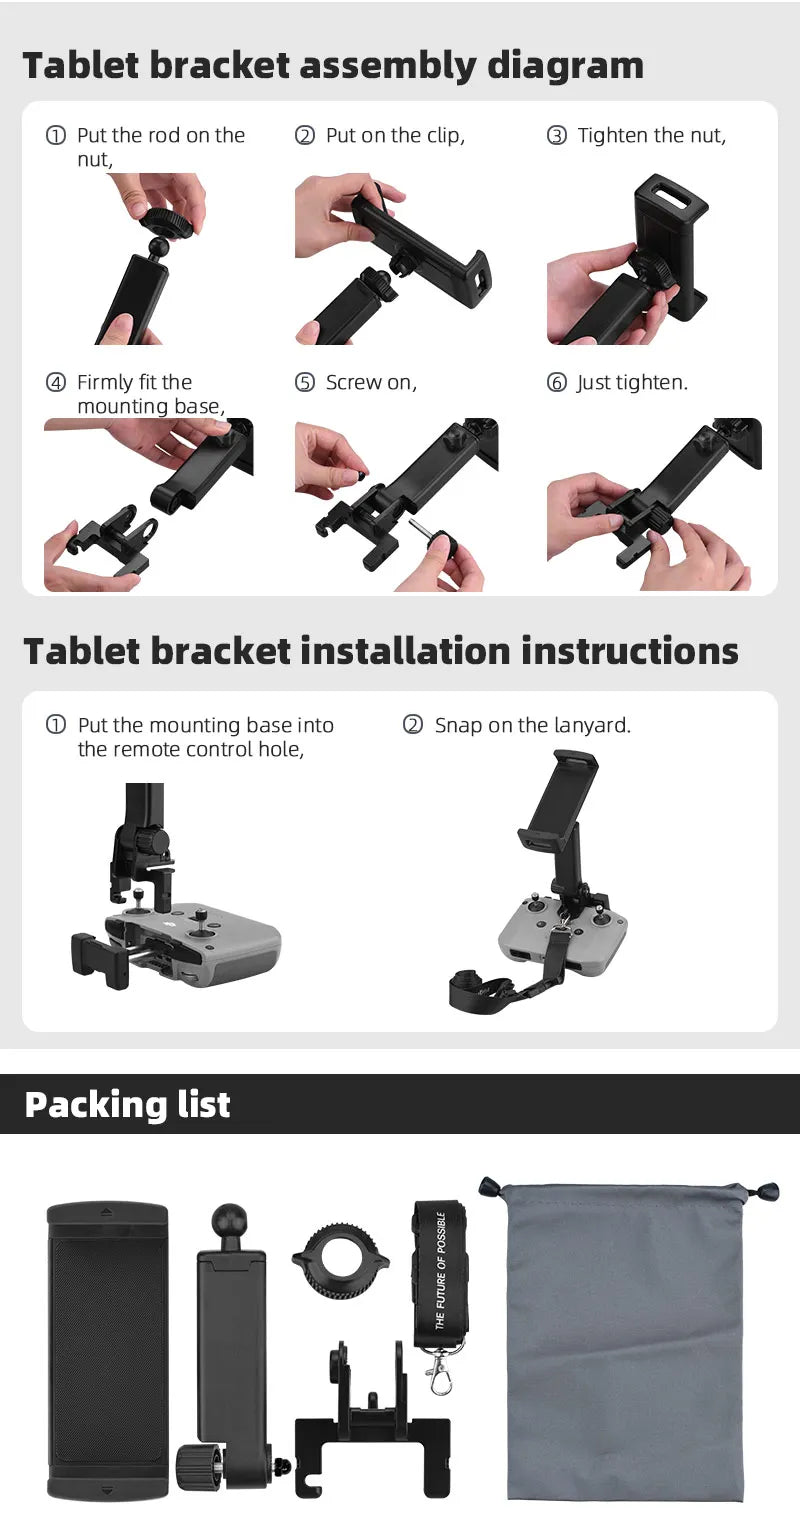 Tablet Extended Bracket Holder, tablet bracket assembly diagram Put the rod on the Snap on the lanyard . the remote